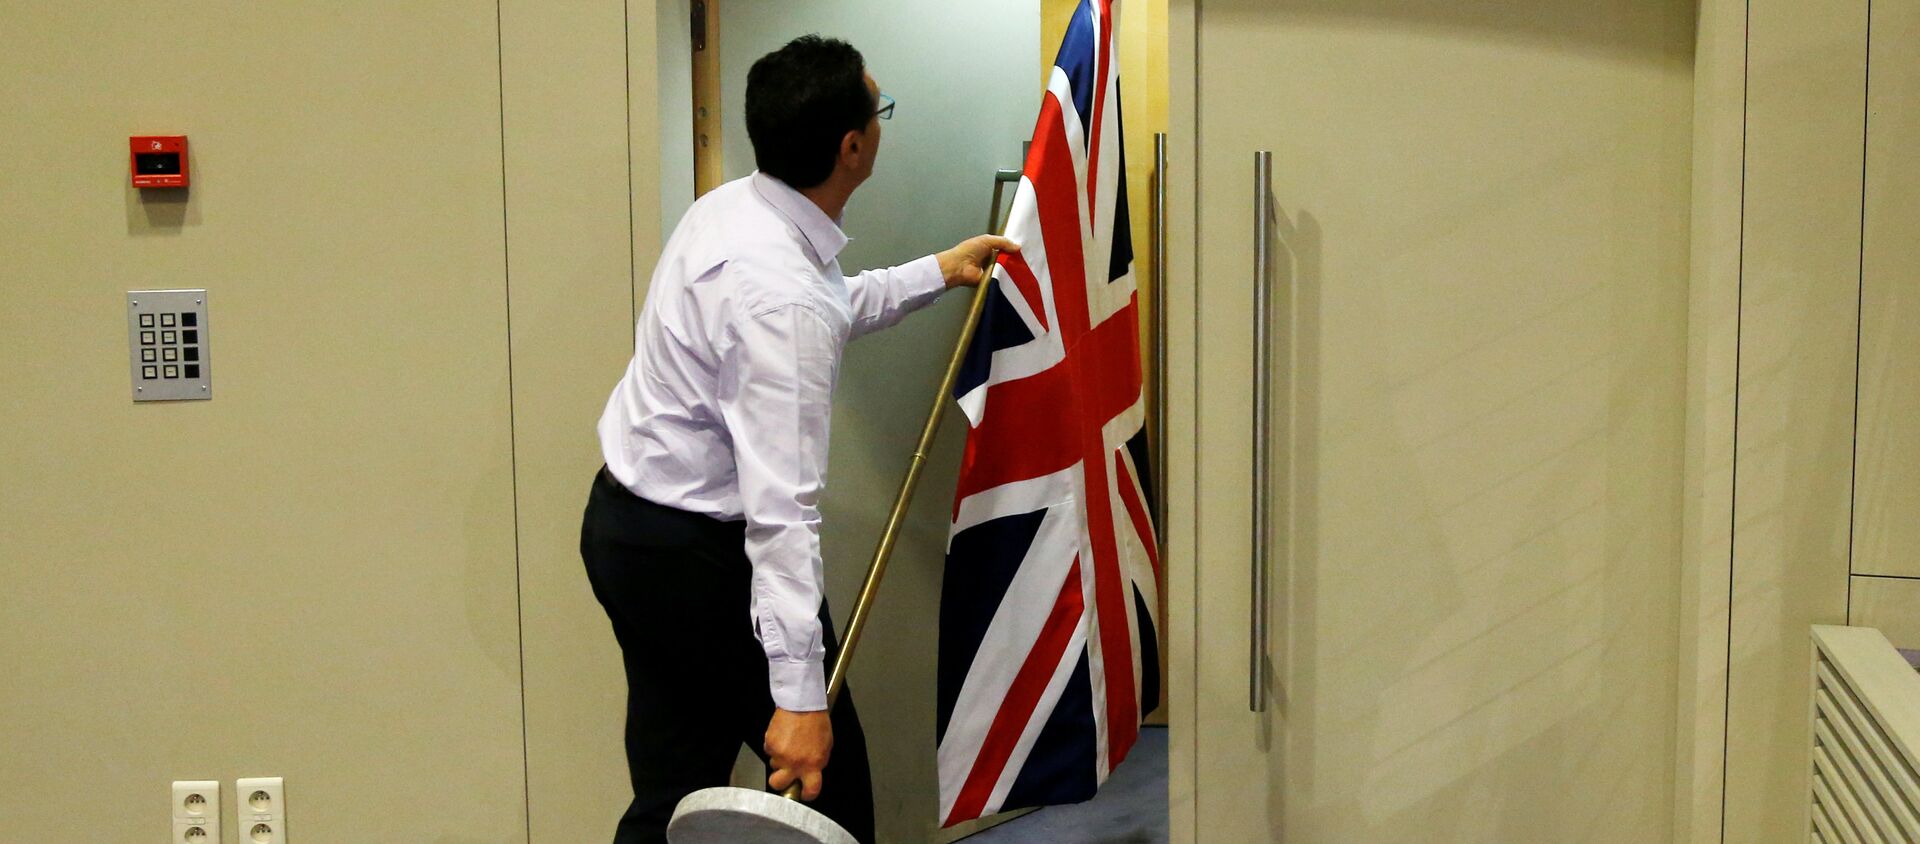 An official carries a Union Jack flag ahead of a news conference by Britain's Secretary of State for Exiting the European Union David Davis and European Union's chief Brexit negotiator Michel Barnier in Brussels, Belgium July 20, 2017 - Sputnik International, 1920, 06.03.2021